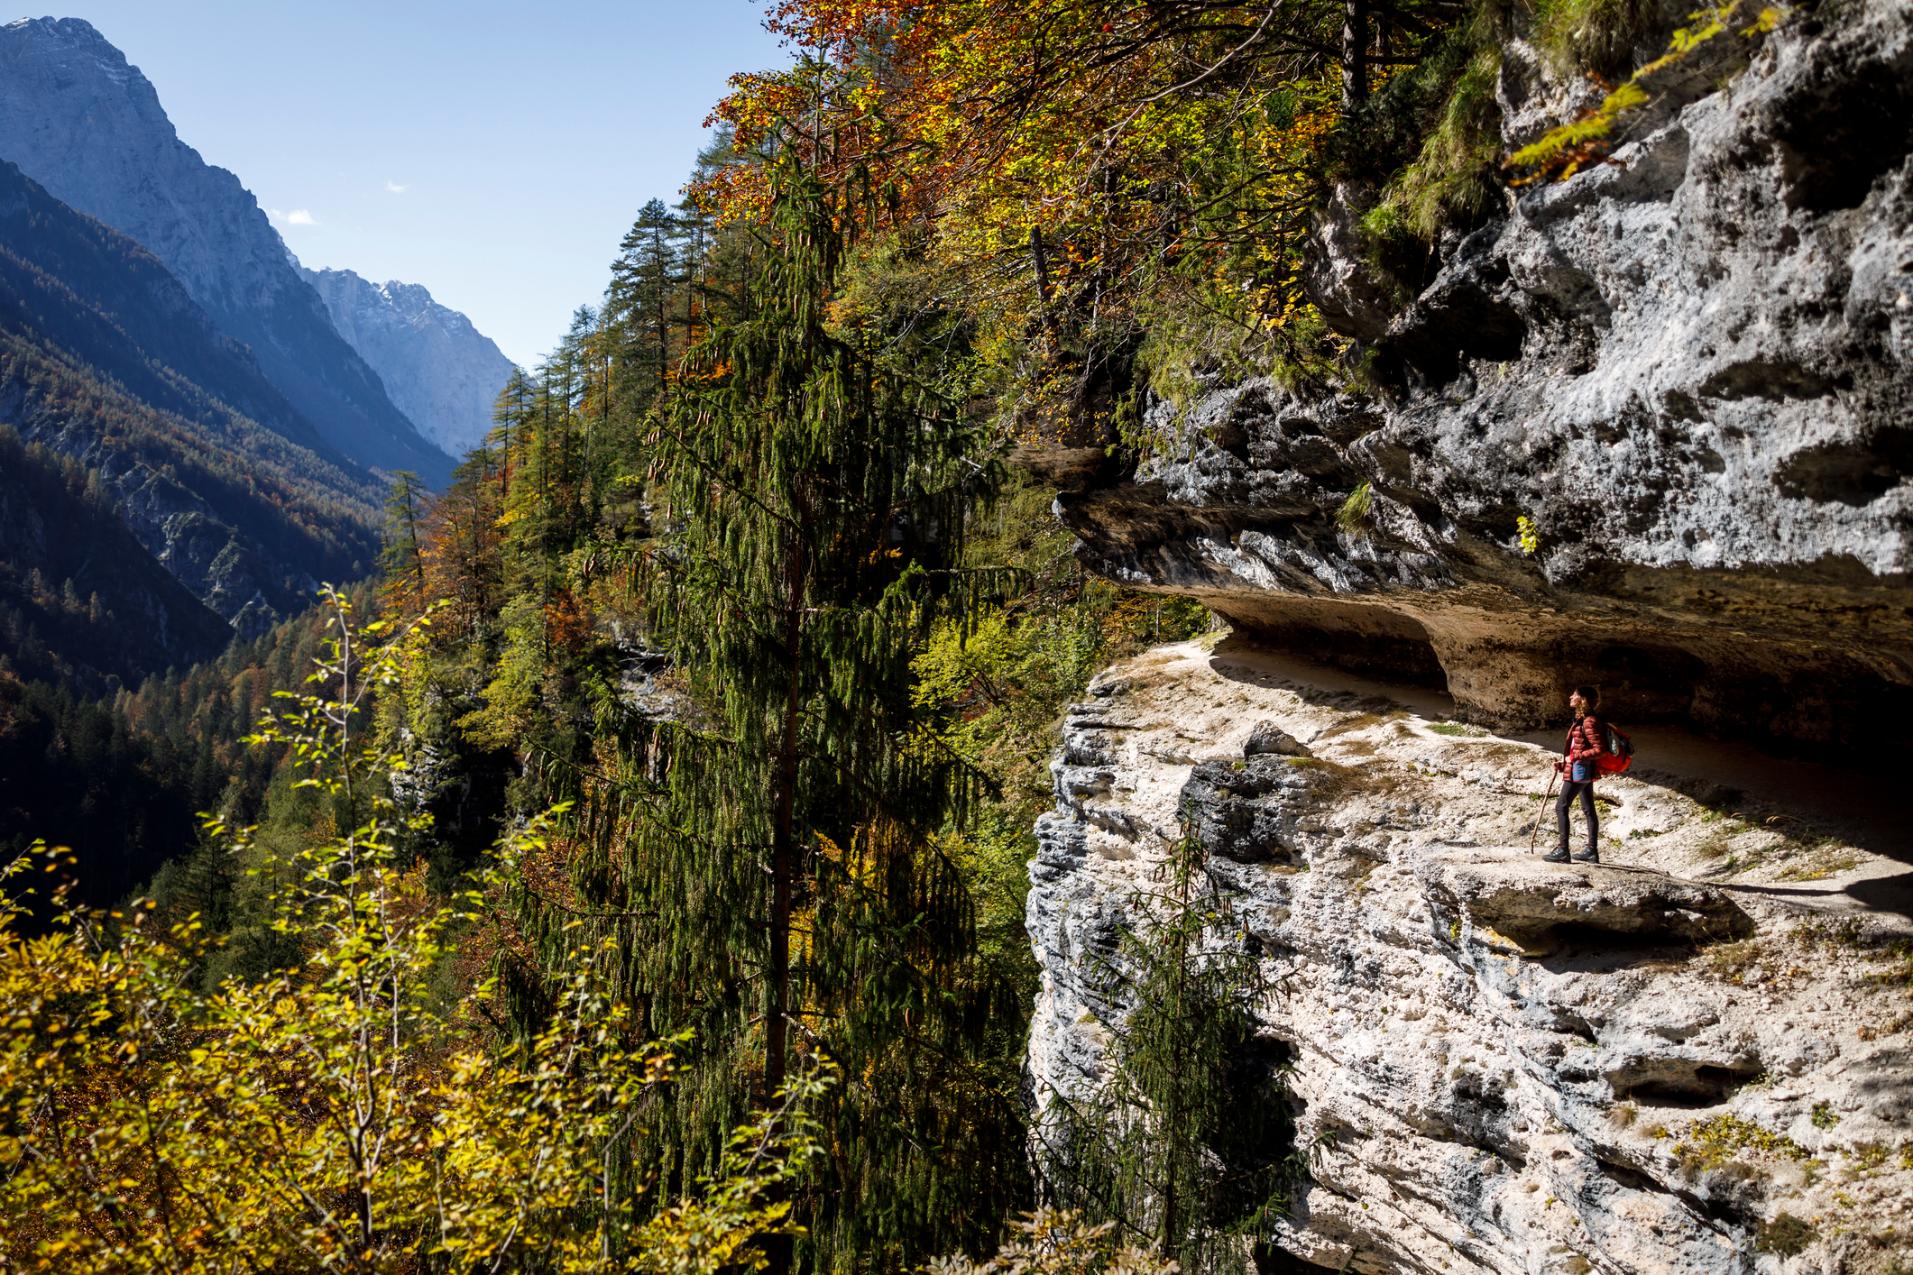 A hiker in the Vrata Valley of Slovenia's Julian Alps. Photo: Getty.